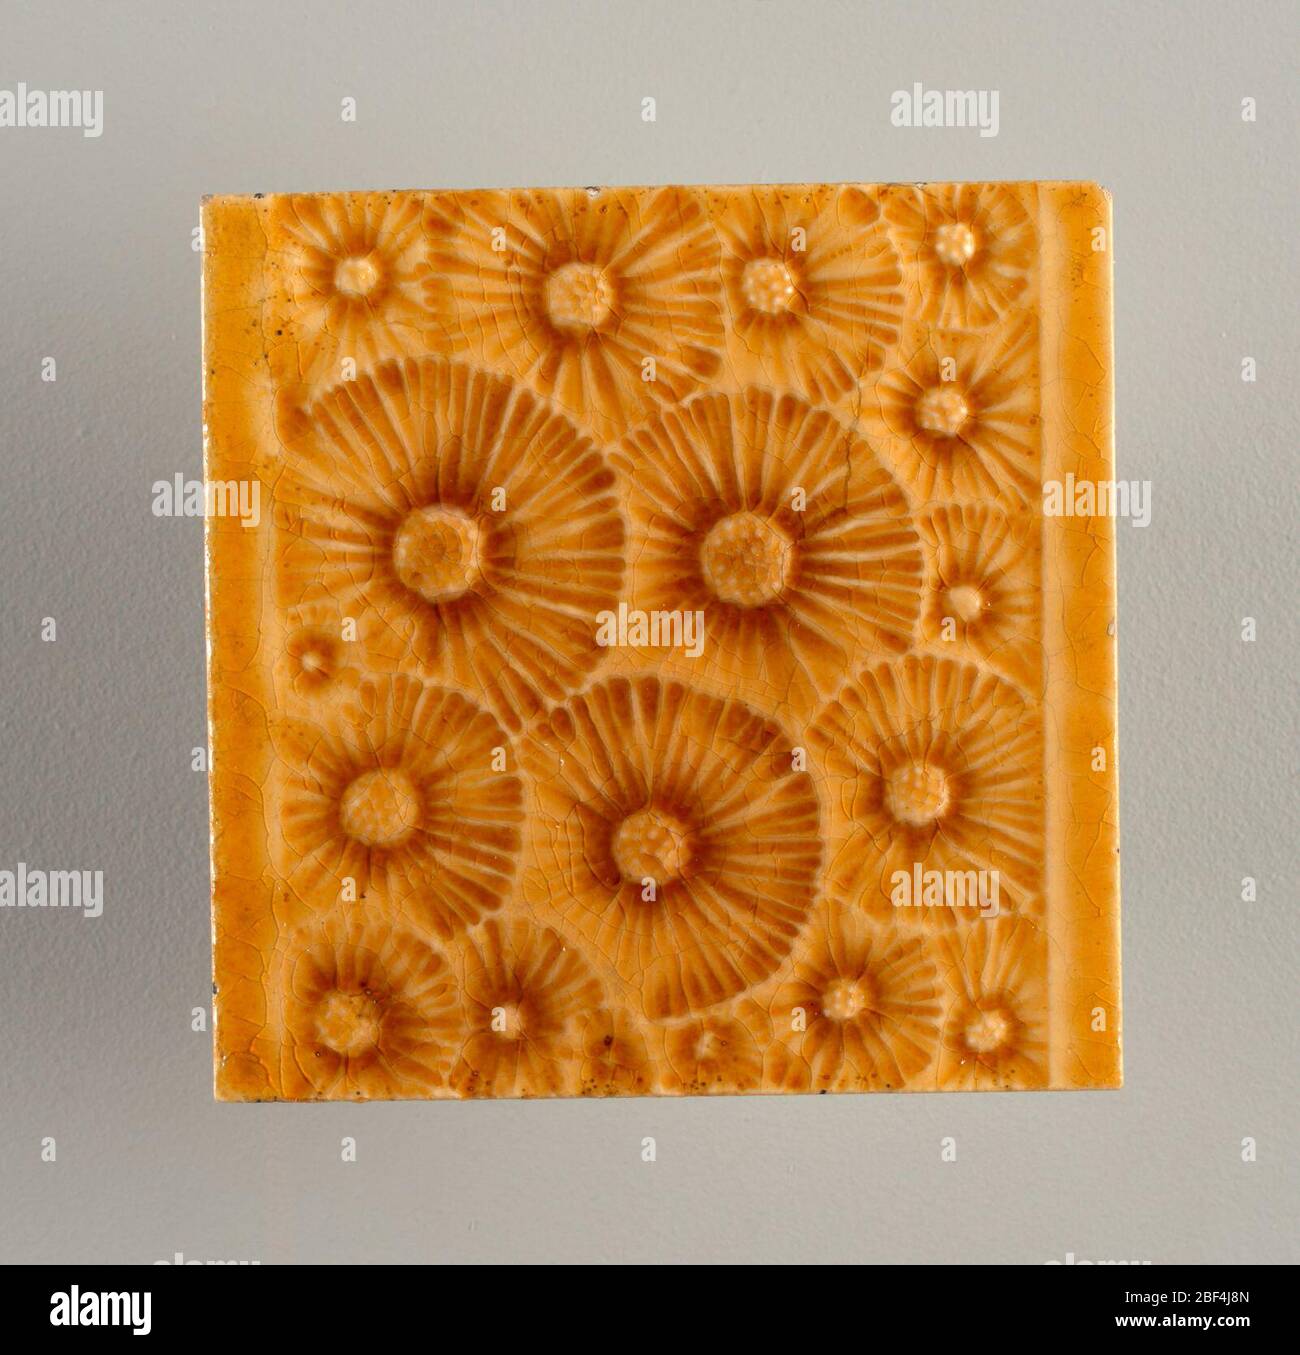 Tile. Square molded tile made of white clay, Tile face is decorated with stylized dandelions (gone to seed) in an all-over pattern set between plain horizontal borders. Tile is painted deep honey-brown crackle glaze. Stock Photo